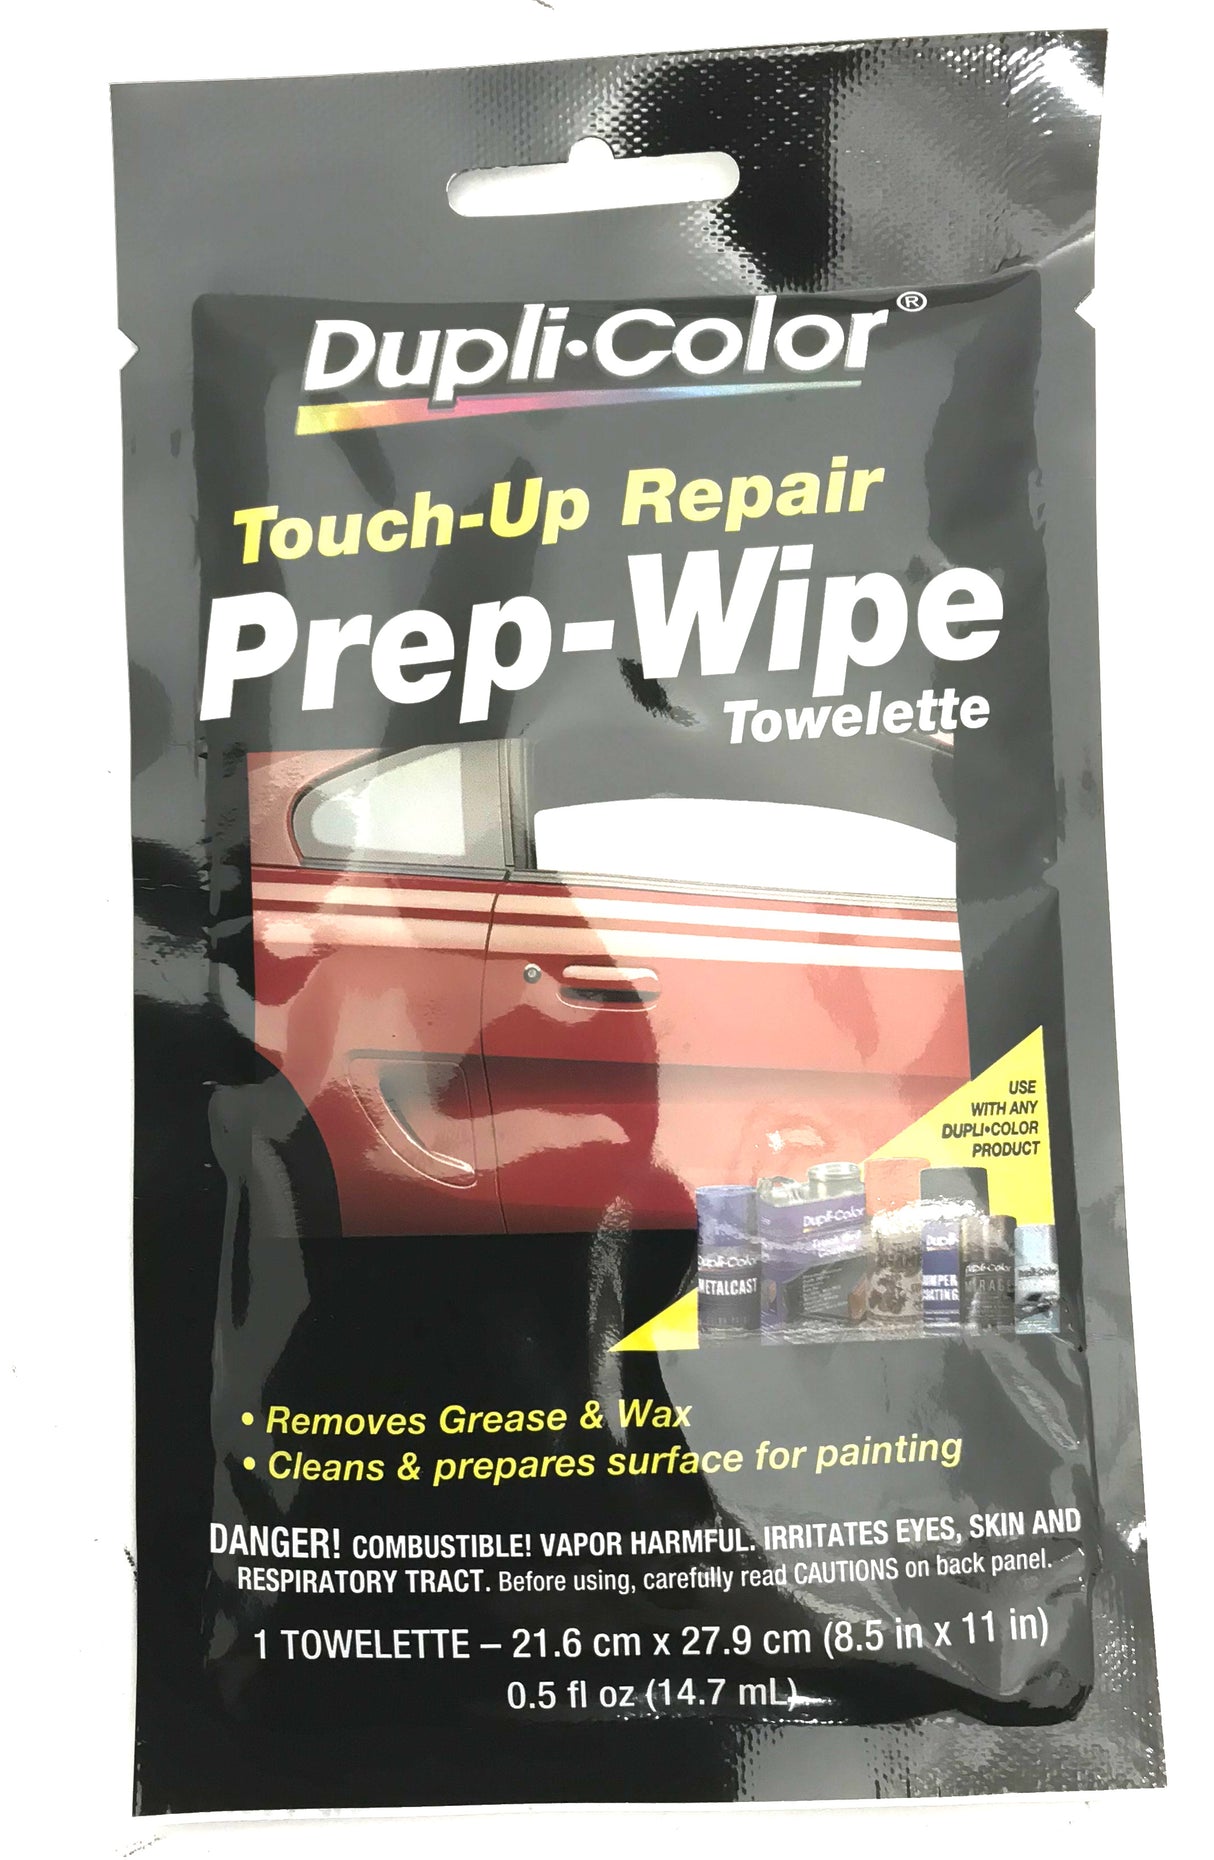 Duplicolor PW100 Touch-up Repair Prep-Wipe Towelette